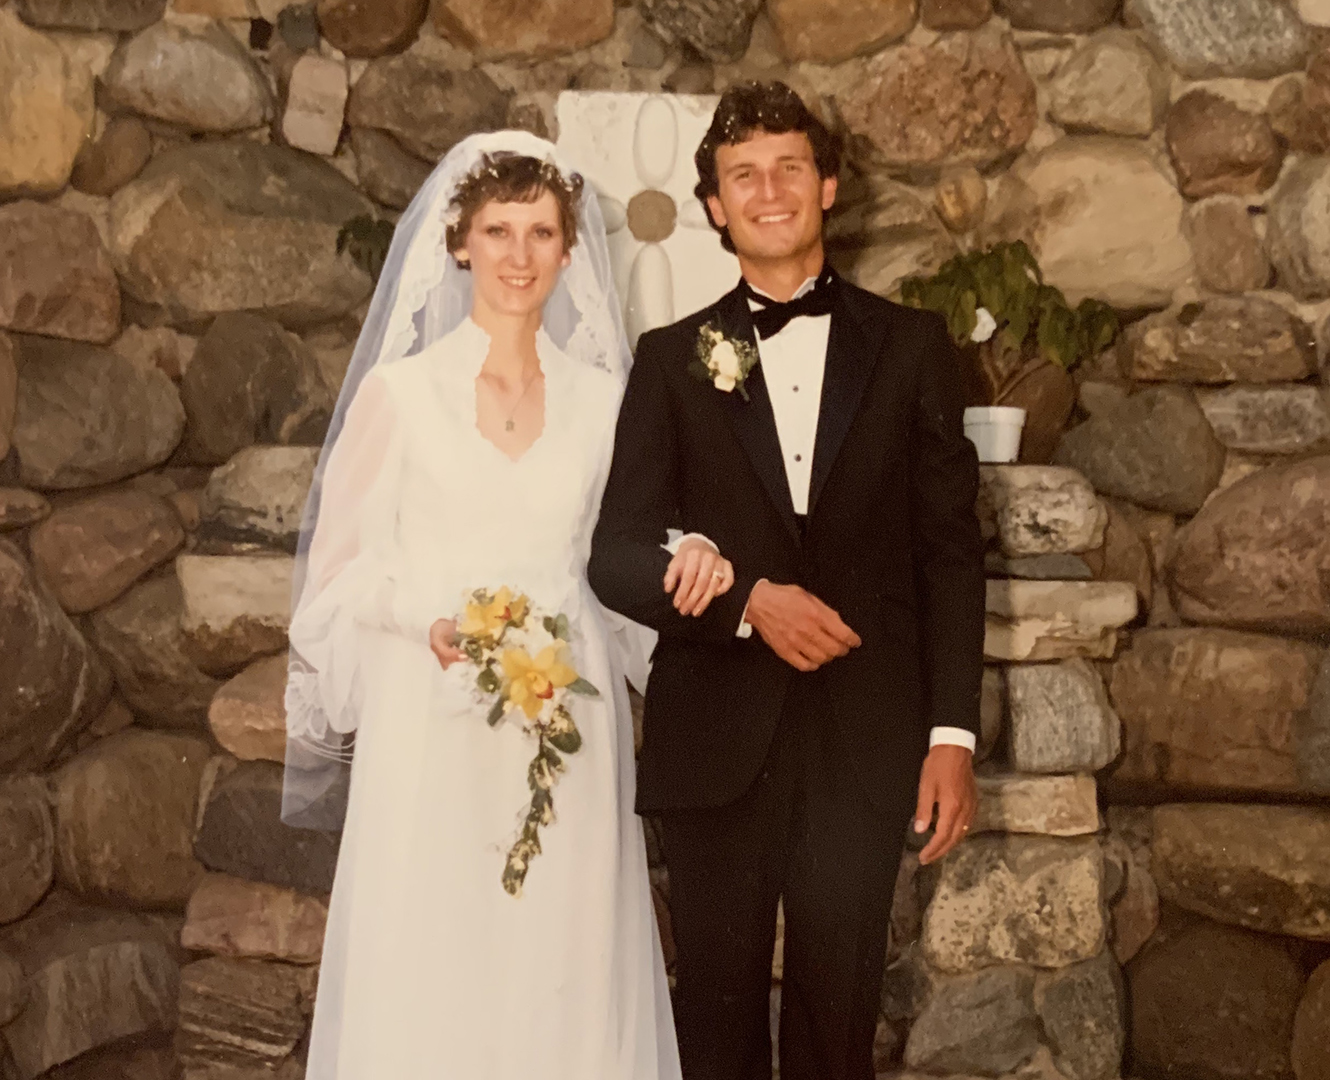 43 Years Later: “marriage is a marathon”